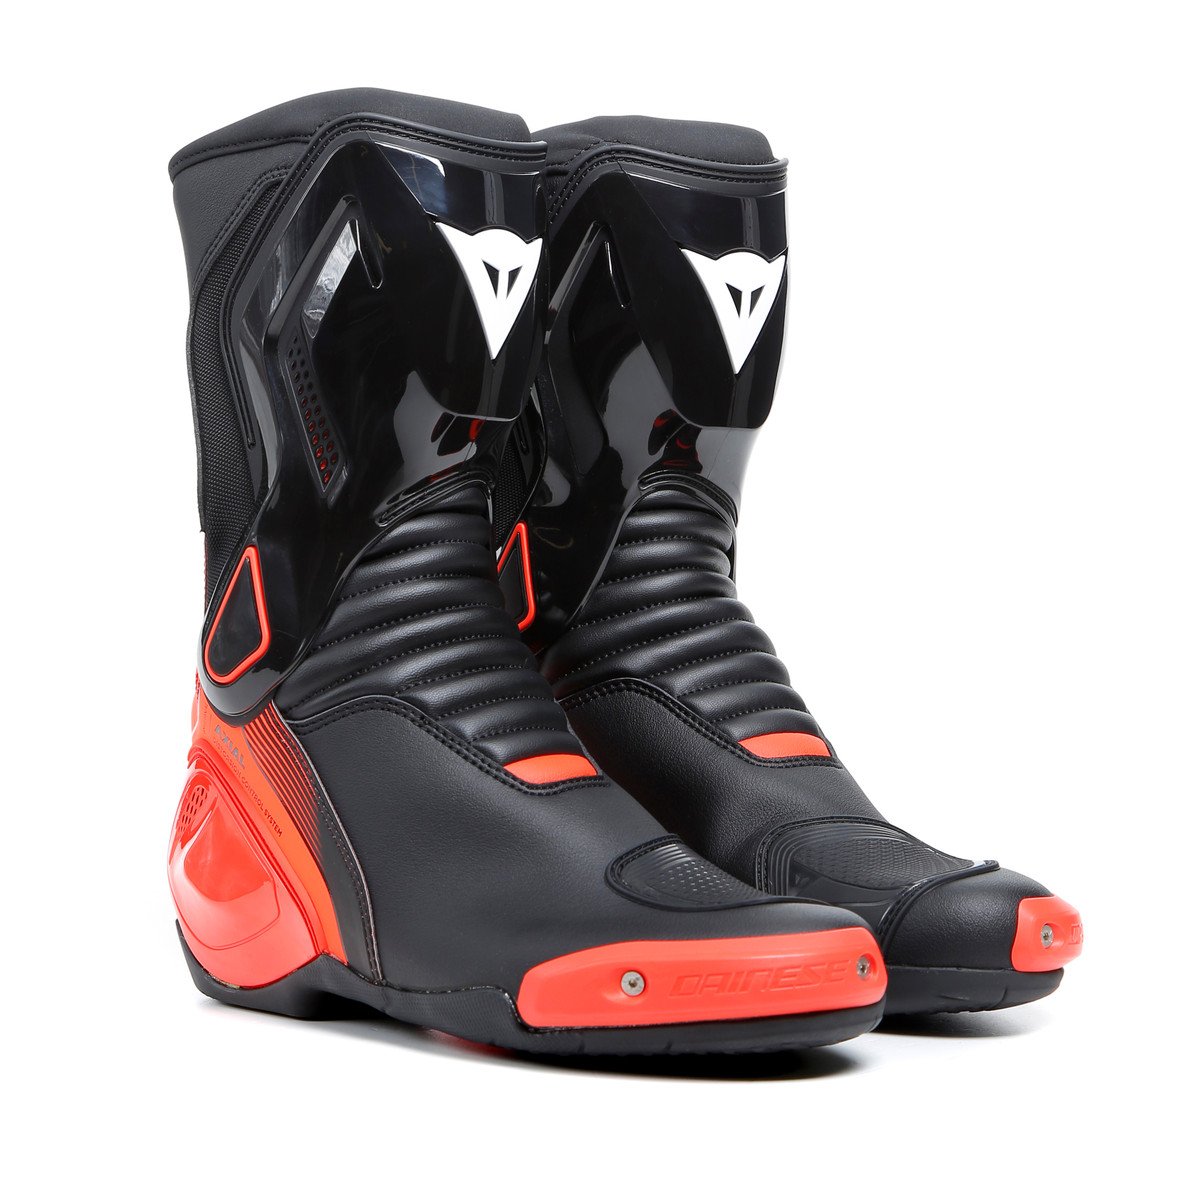 Image of Dainese Nexus 2 Boots Black Fluo Red Size 43 EN